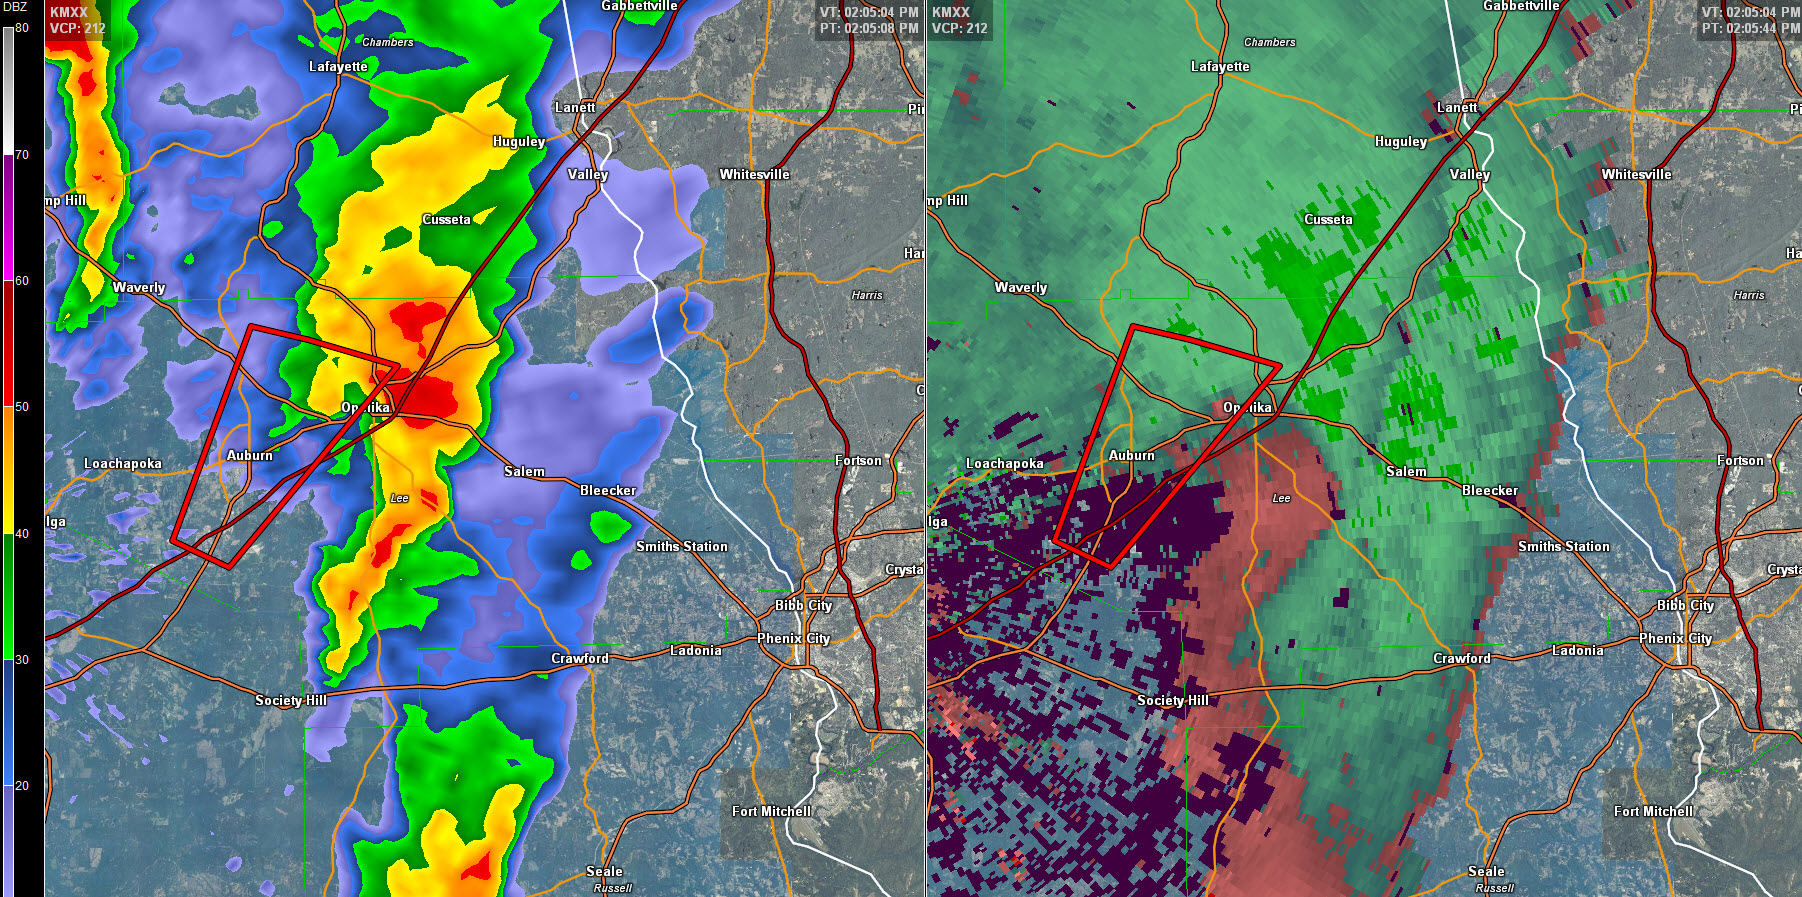 Tornado Warning Continues For Lee County Until 215 Pm Cst The Alabama Weather Blog 